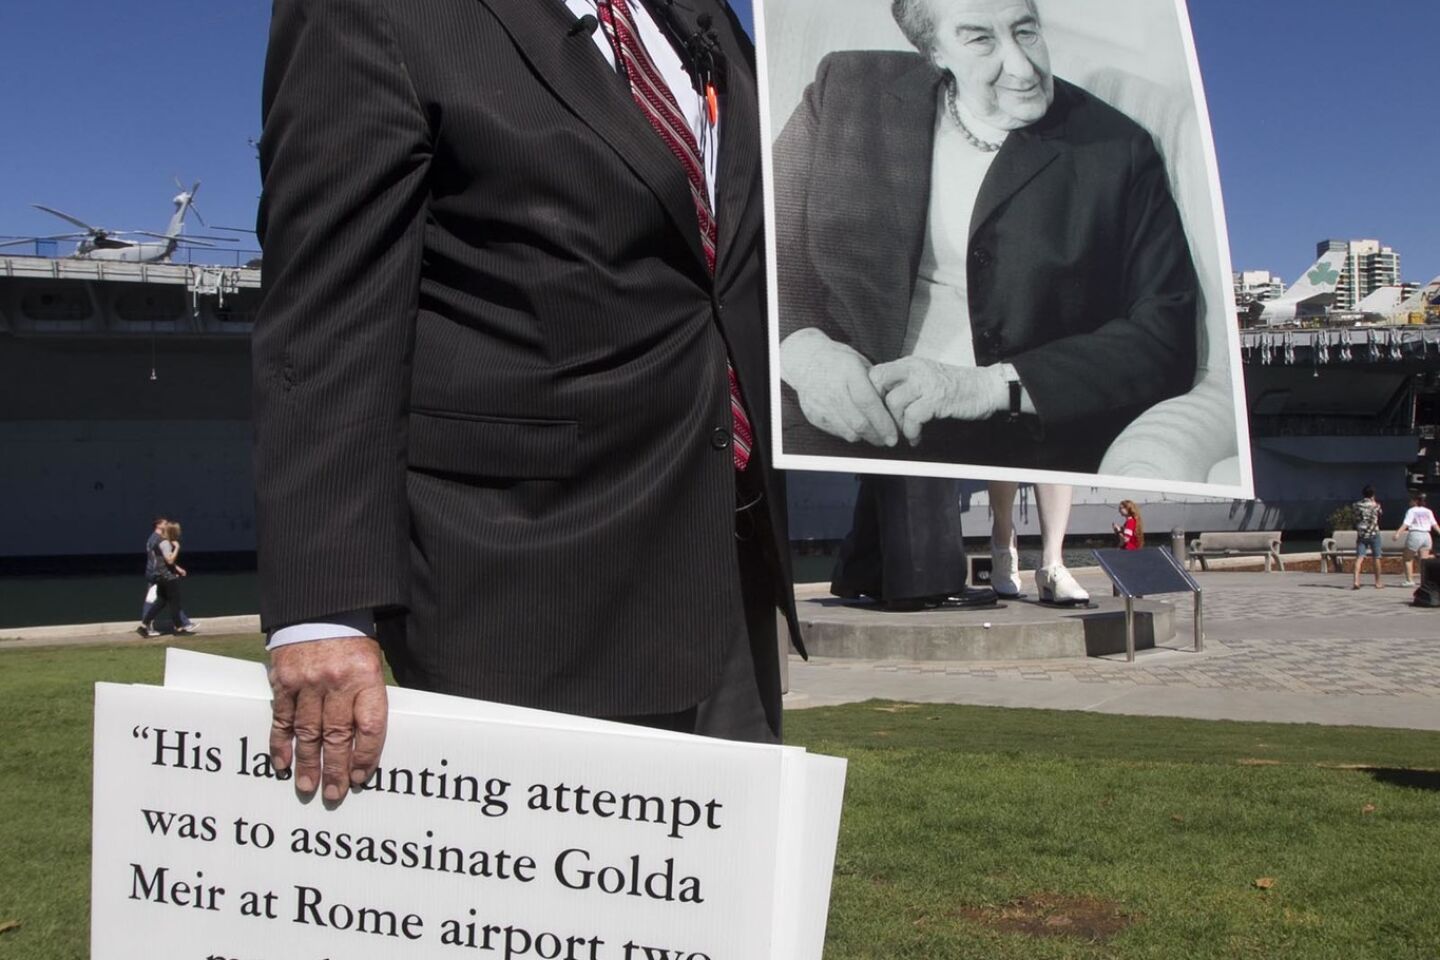 The late Israeli prime minister Golda Meir ordered a series of killings aimed at those responsible for the Munich Massacre. Ammar Campa-Najjar's grandfather was killed as part of the effort, known as Operation Wrath of God.